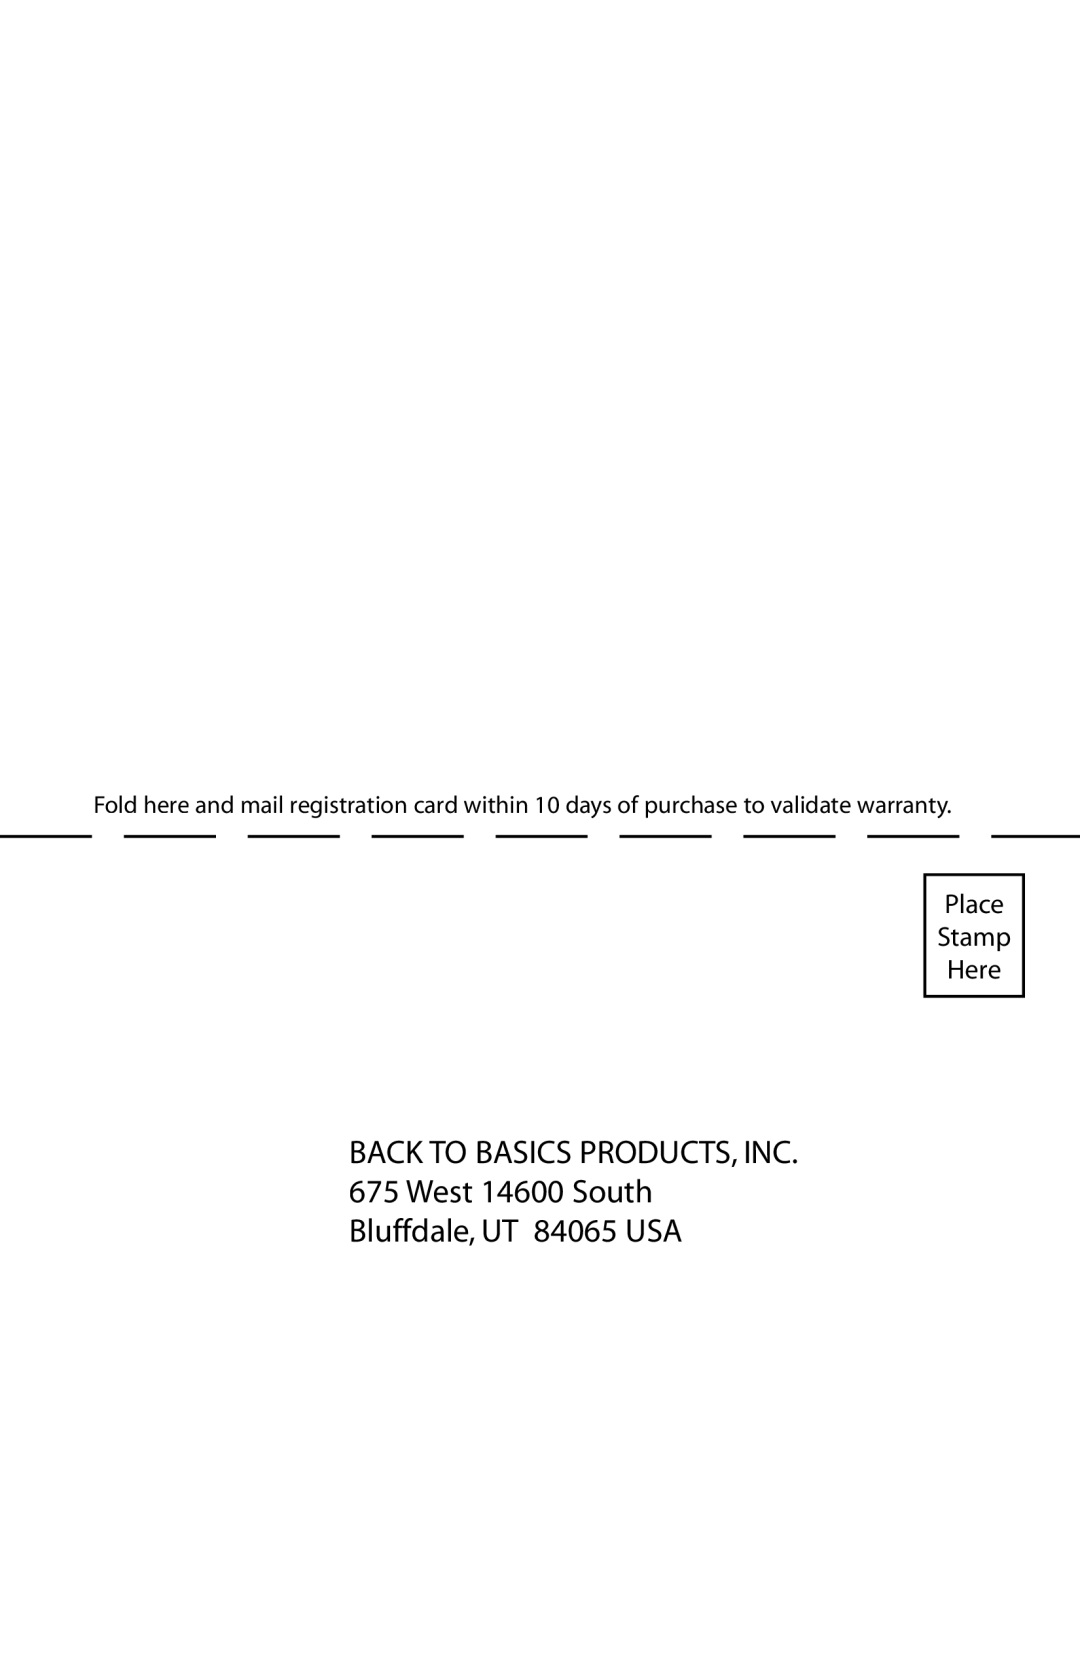 West Bend Back to Basics SUP400BINST manual Place Stamp Here, BACK TO BASICS PRODUCTS, INC 675 West 14600 South 